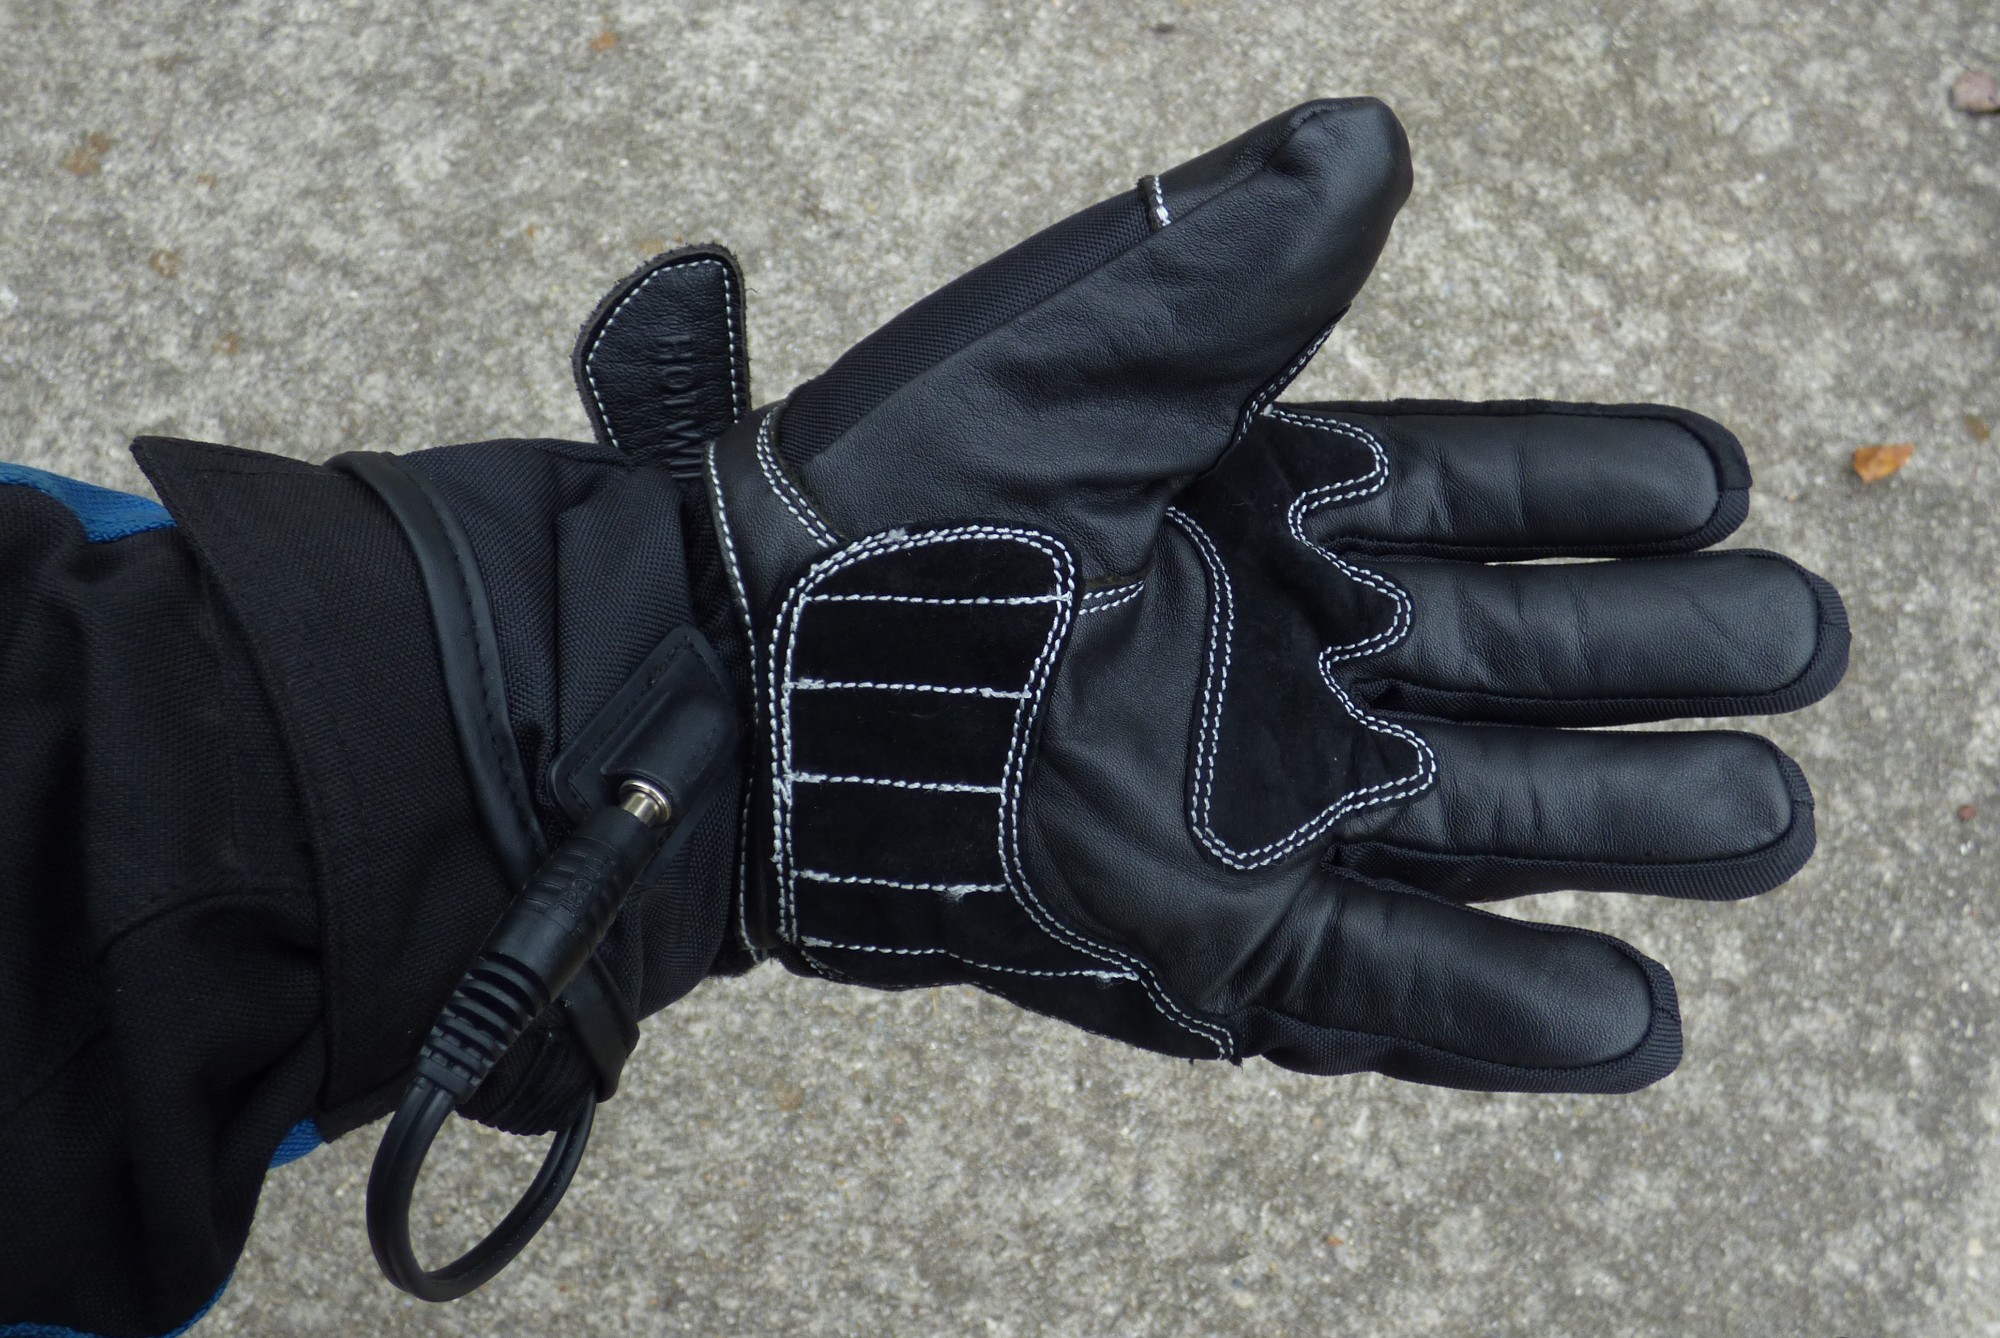 Hotwired 12V heated motorcycle glove review